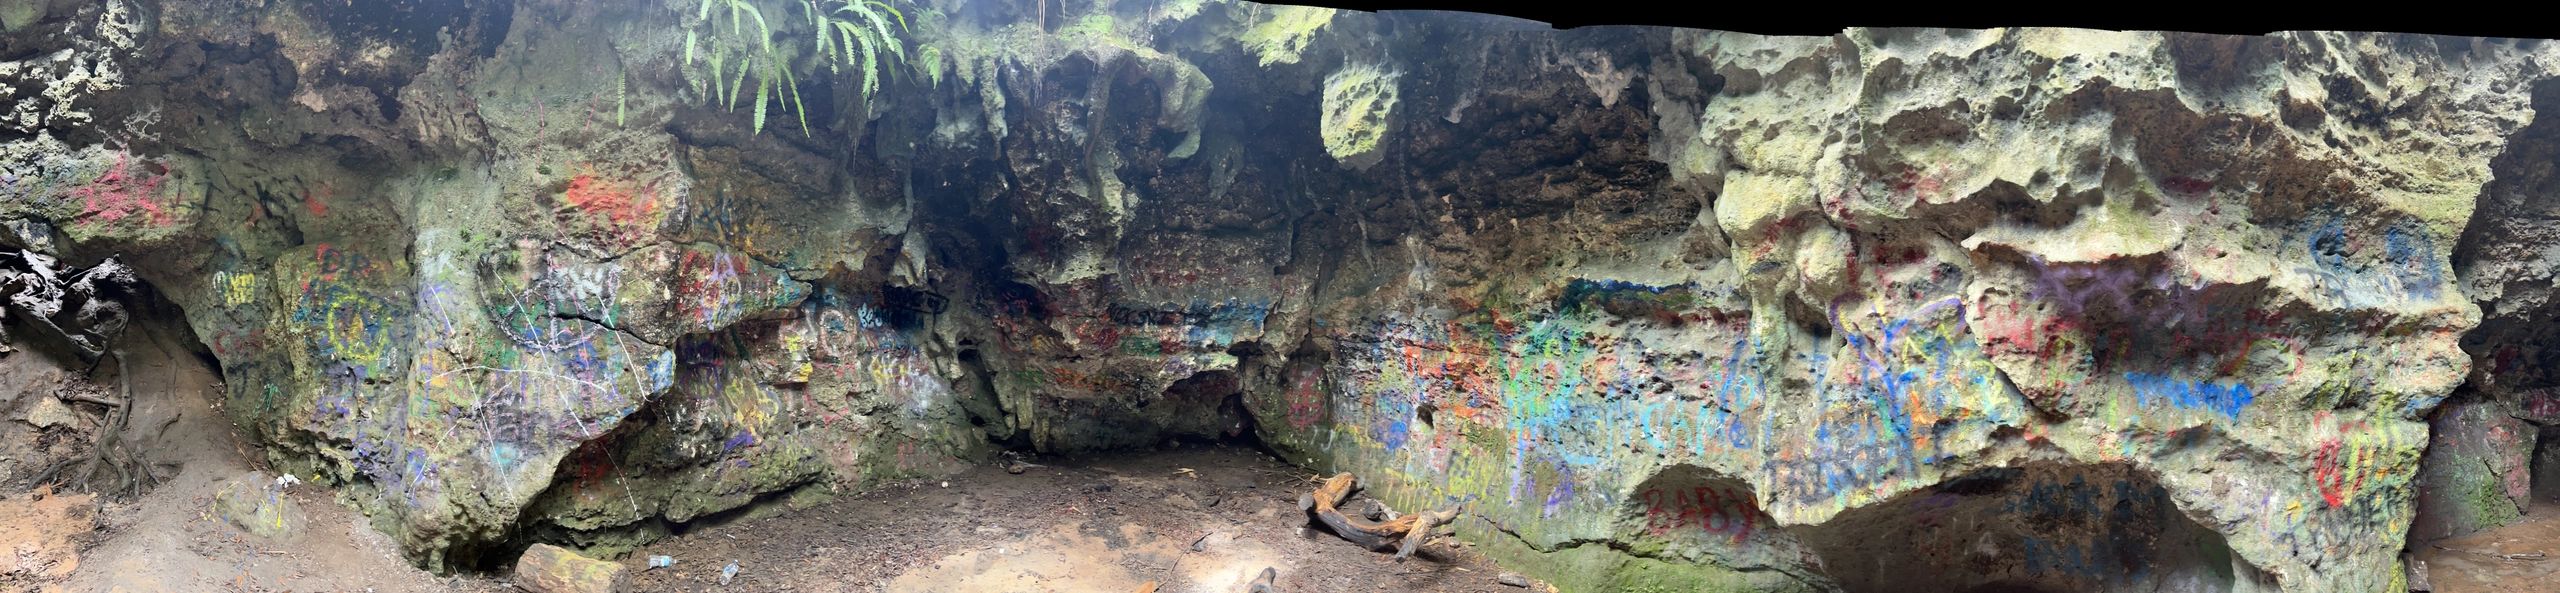 Vandal Cave, Withlacoochee State Forest in Citrus County Florida on Trail 22.  